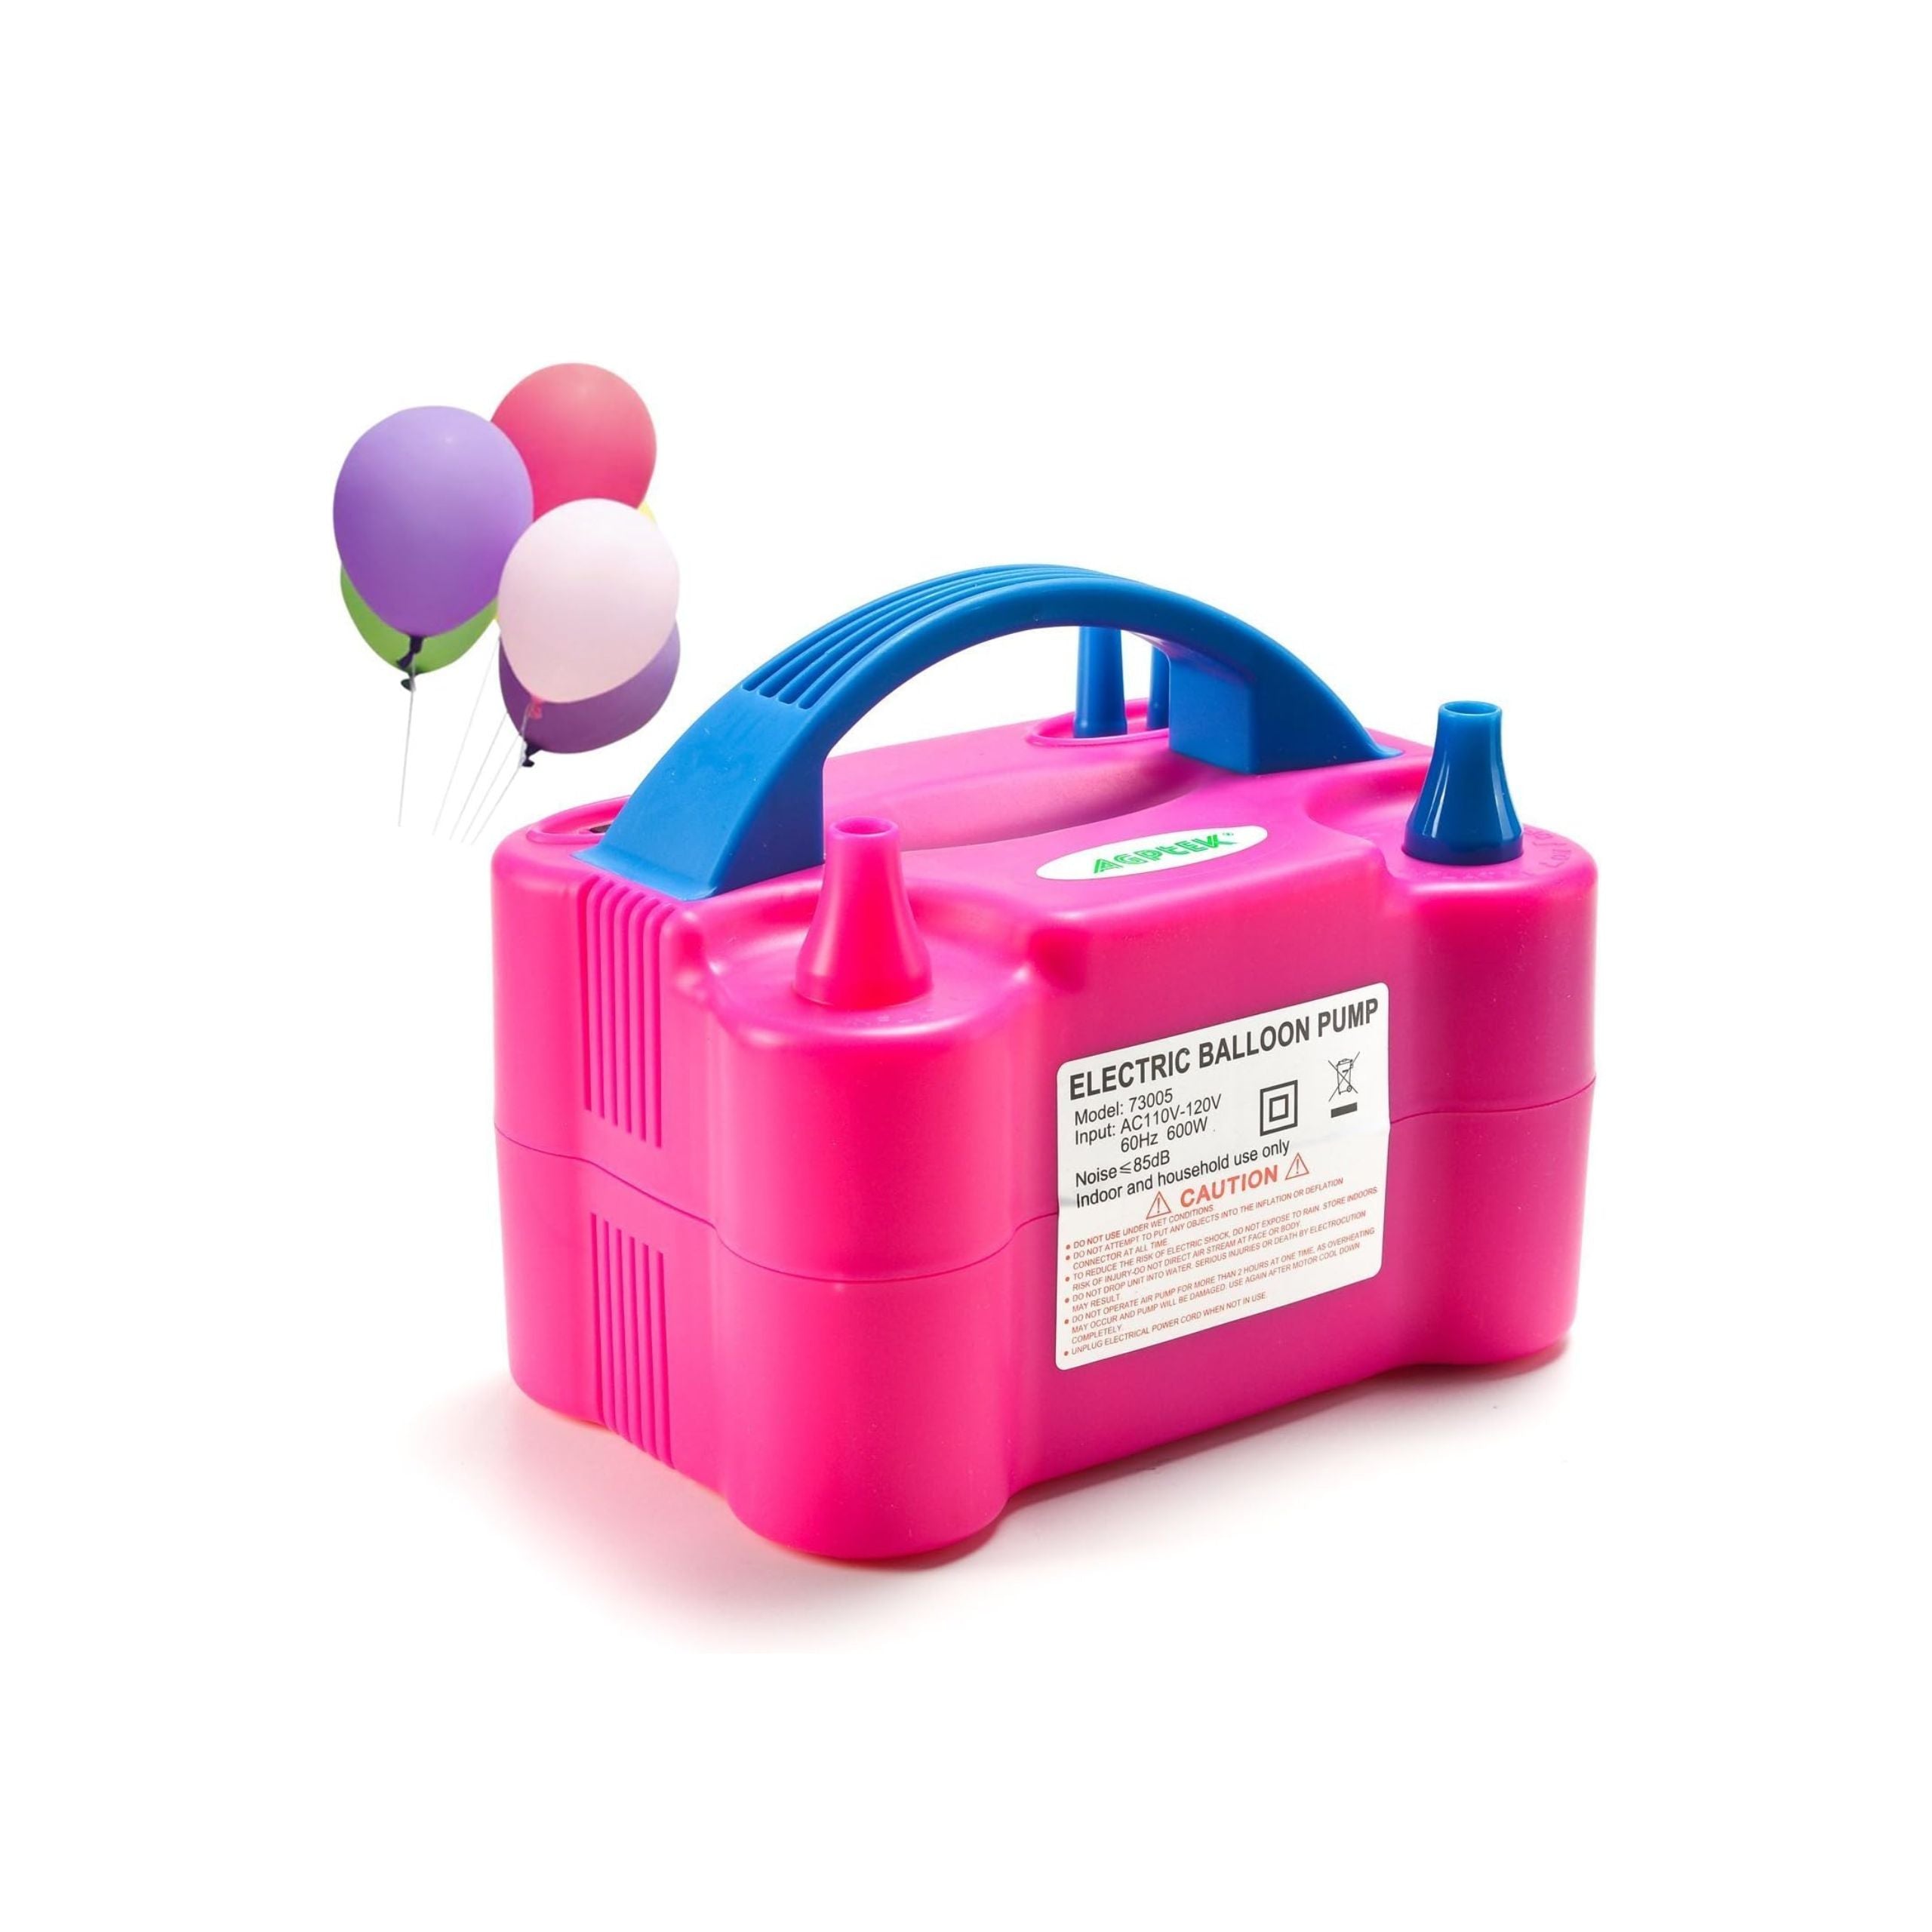 Electric Inflatable Balloon 220v Air Pump 73005 - Pink